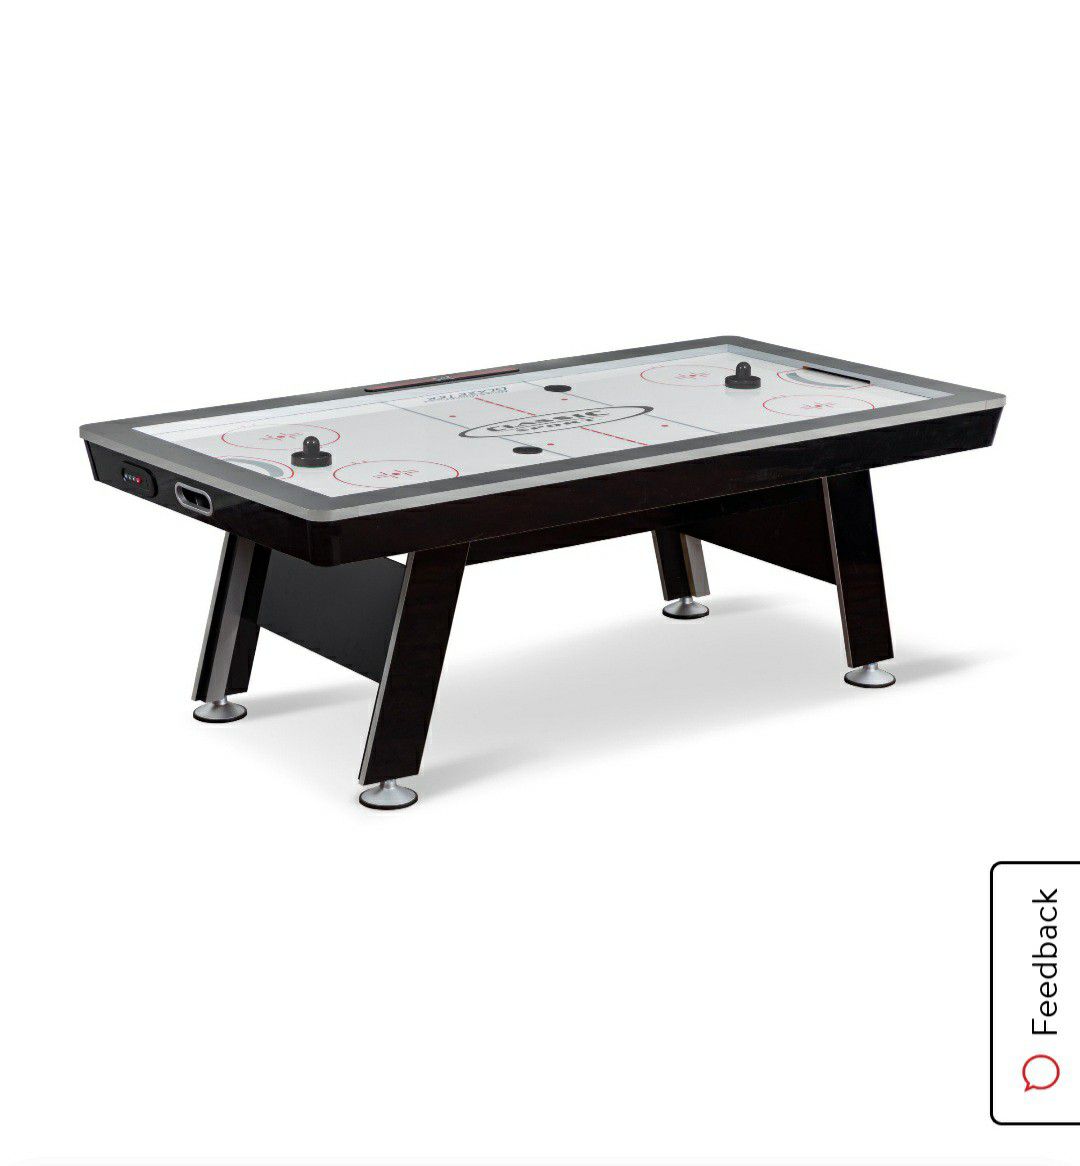 One year old air hockey table from costco for sale. Wife said it must go. In very good condition and ready for new home. Must pick up...no deliveries.